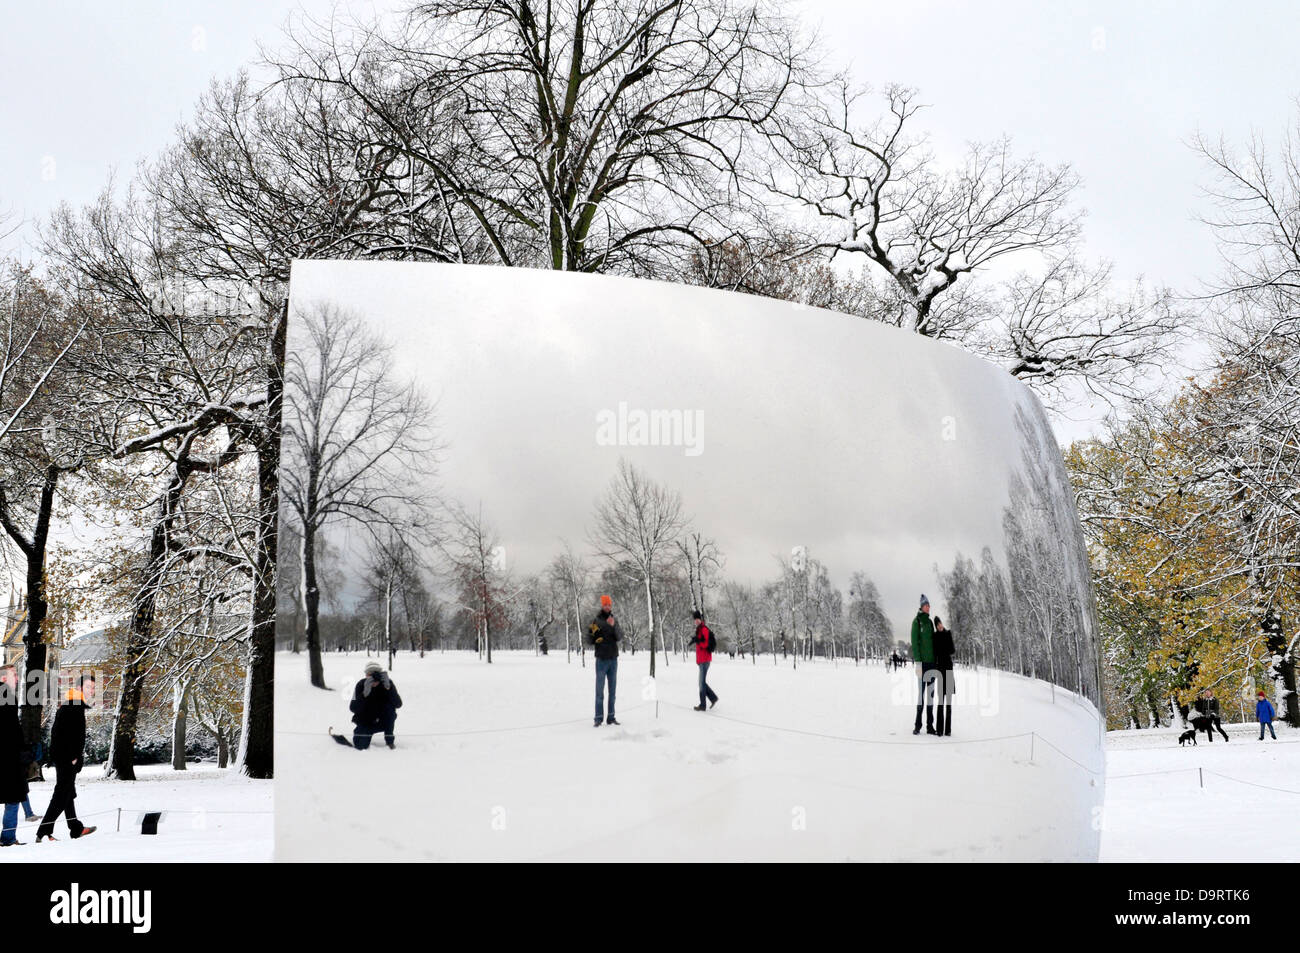 A sculpture by Anish Kapoor on a snowy day, Kensington Gardens, London Stock Photo